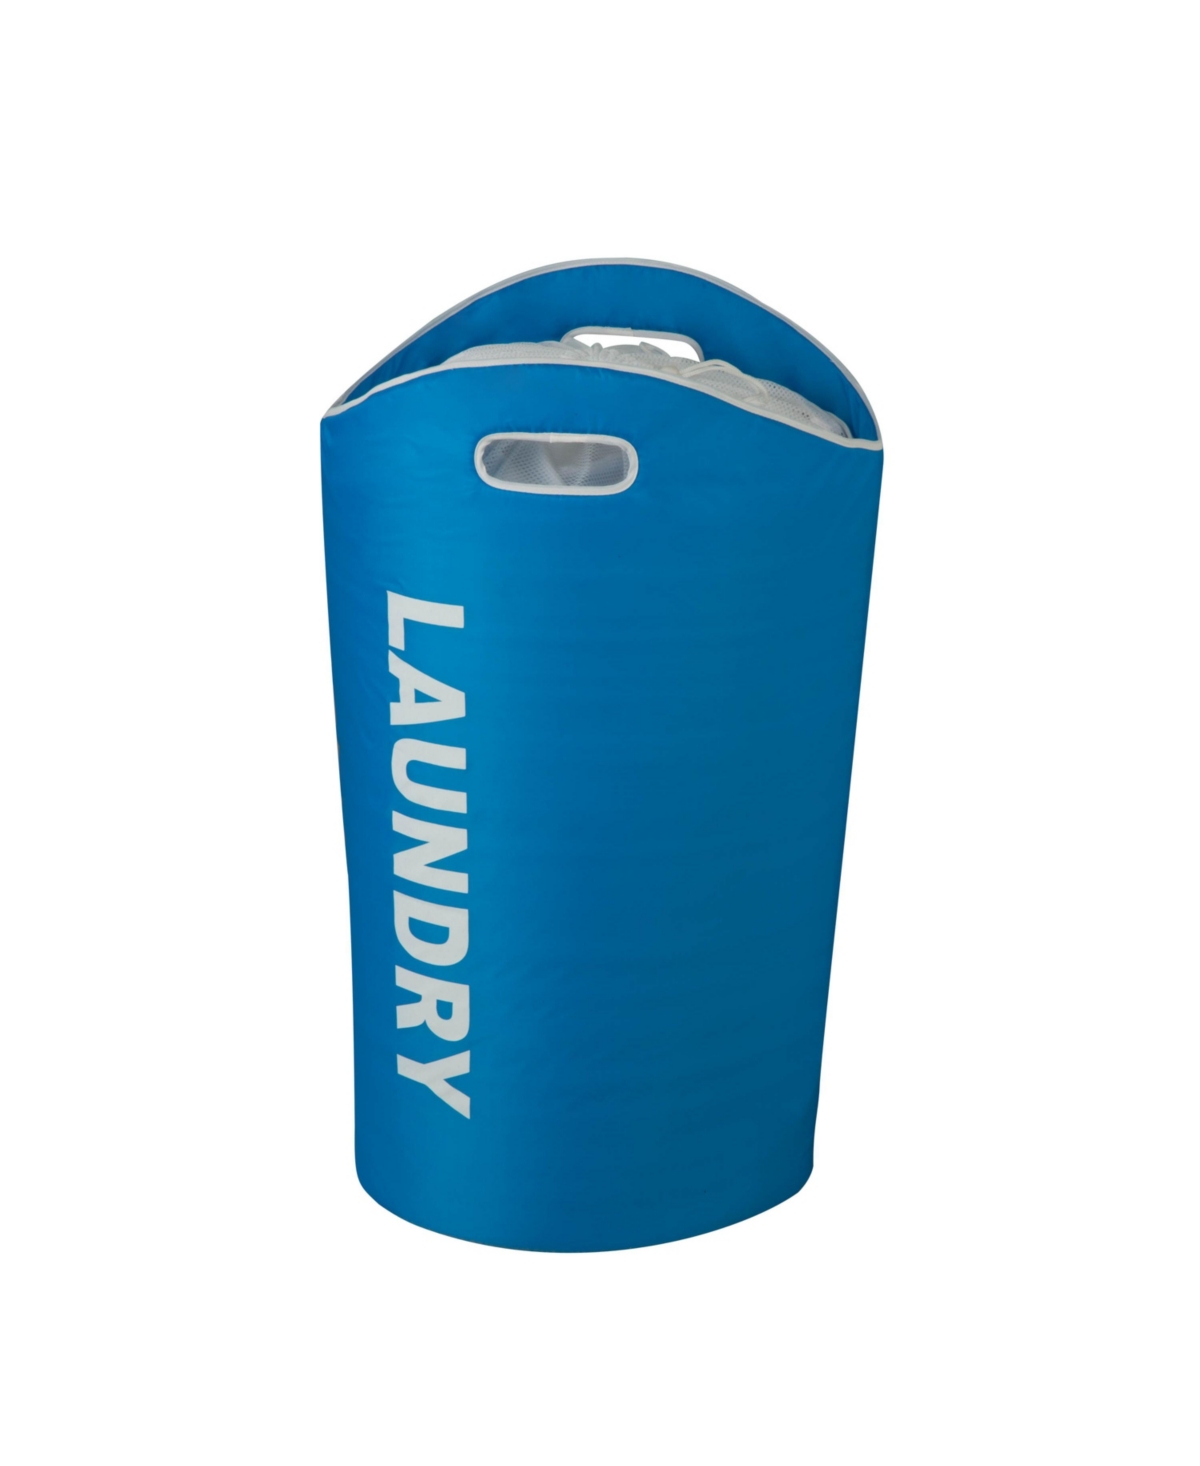 Laundry Hamper with Handles - Blue